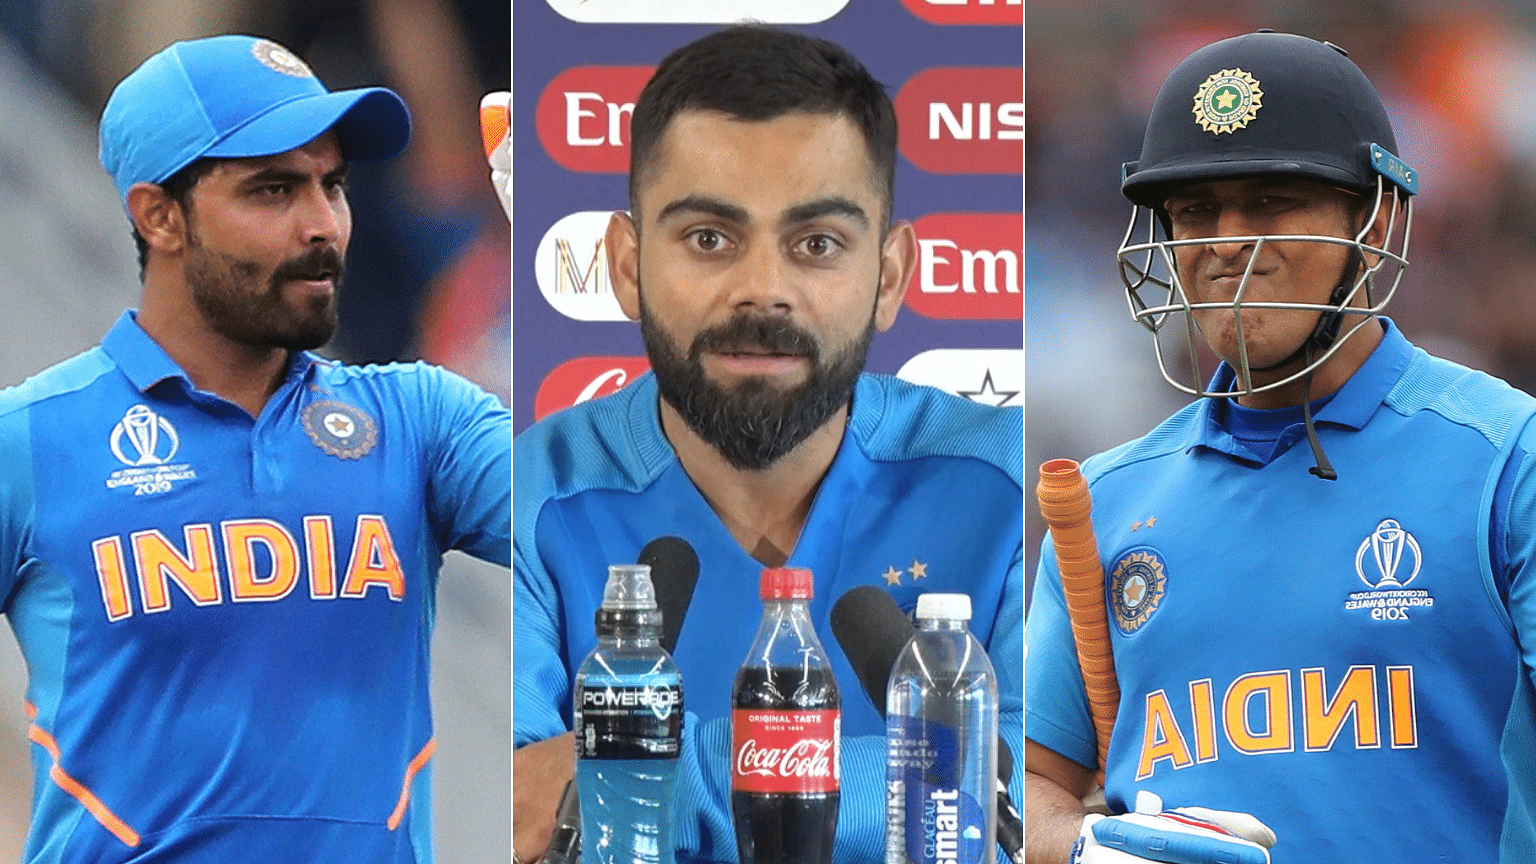 What India captain Virat Kohli said about Ravindra Jadeja and MS Dhoni after their loss to New Zealand in the ICC World Cup semi-final.